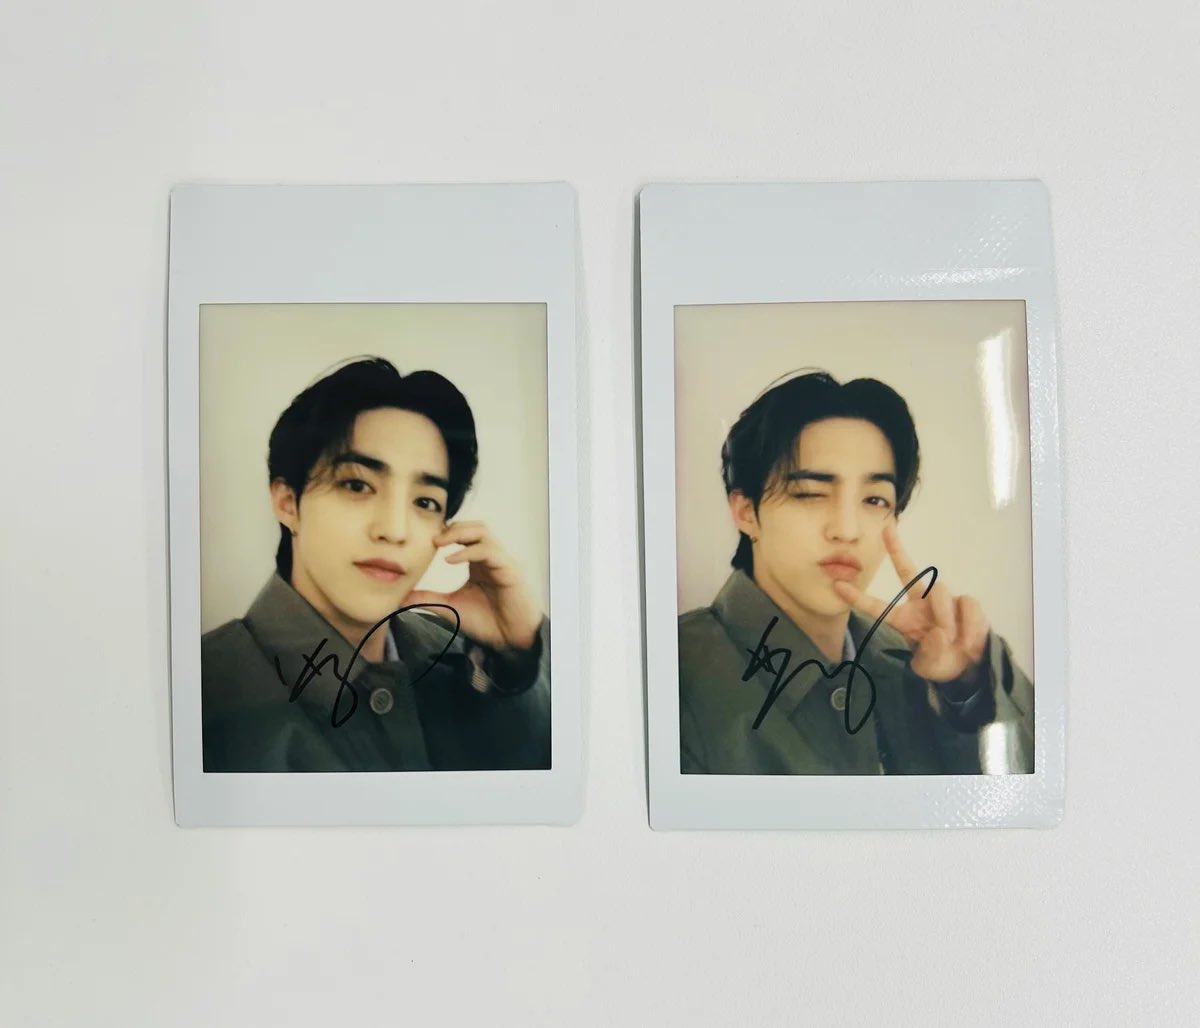 i just noticed the polaroid is upside down 😭 he must’ve held the camera upside down when taking the photo